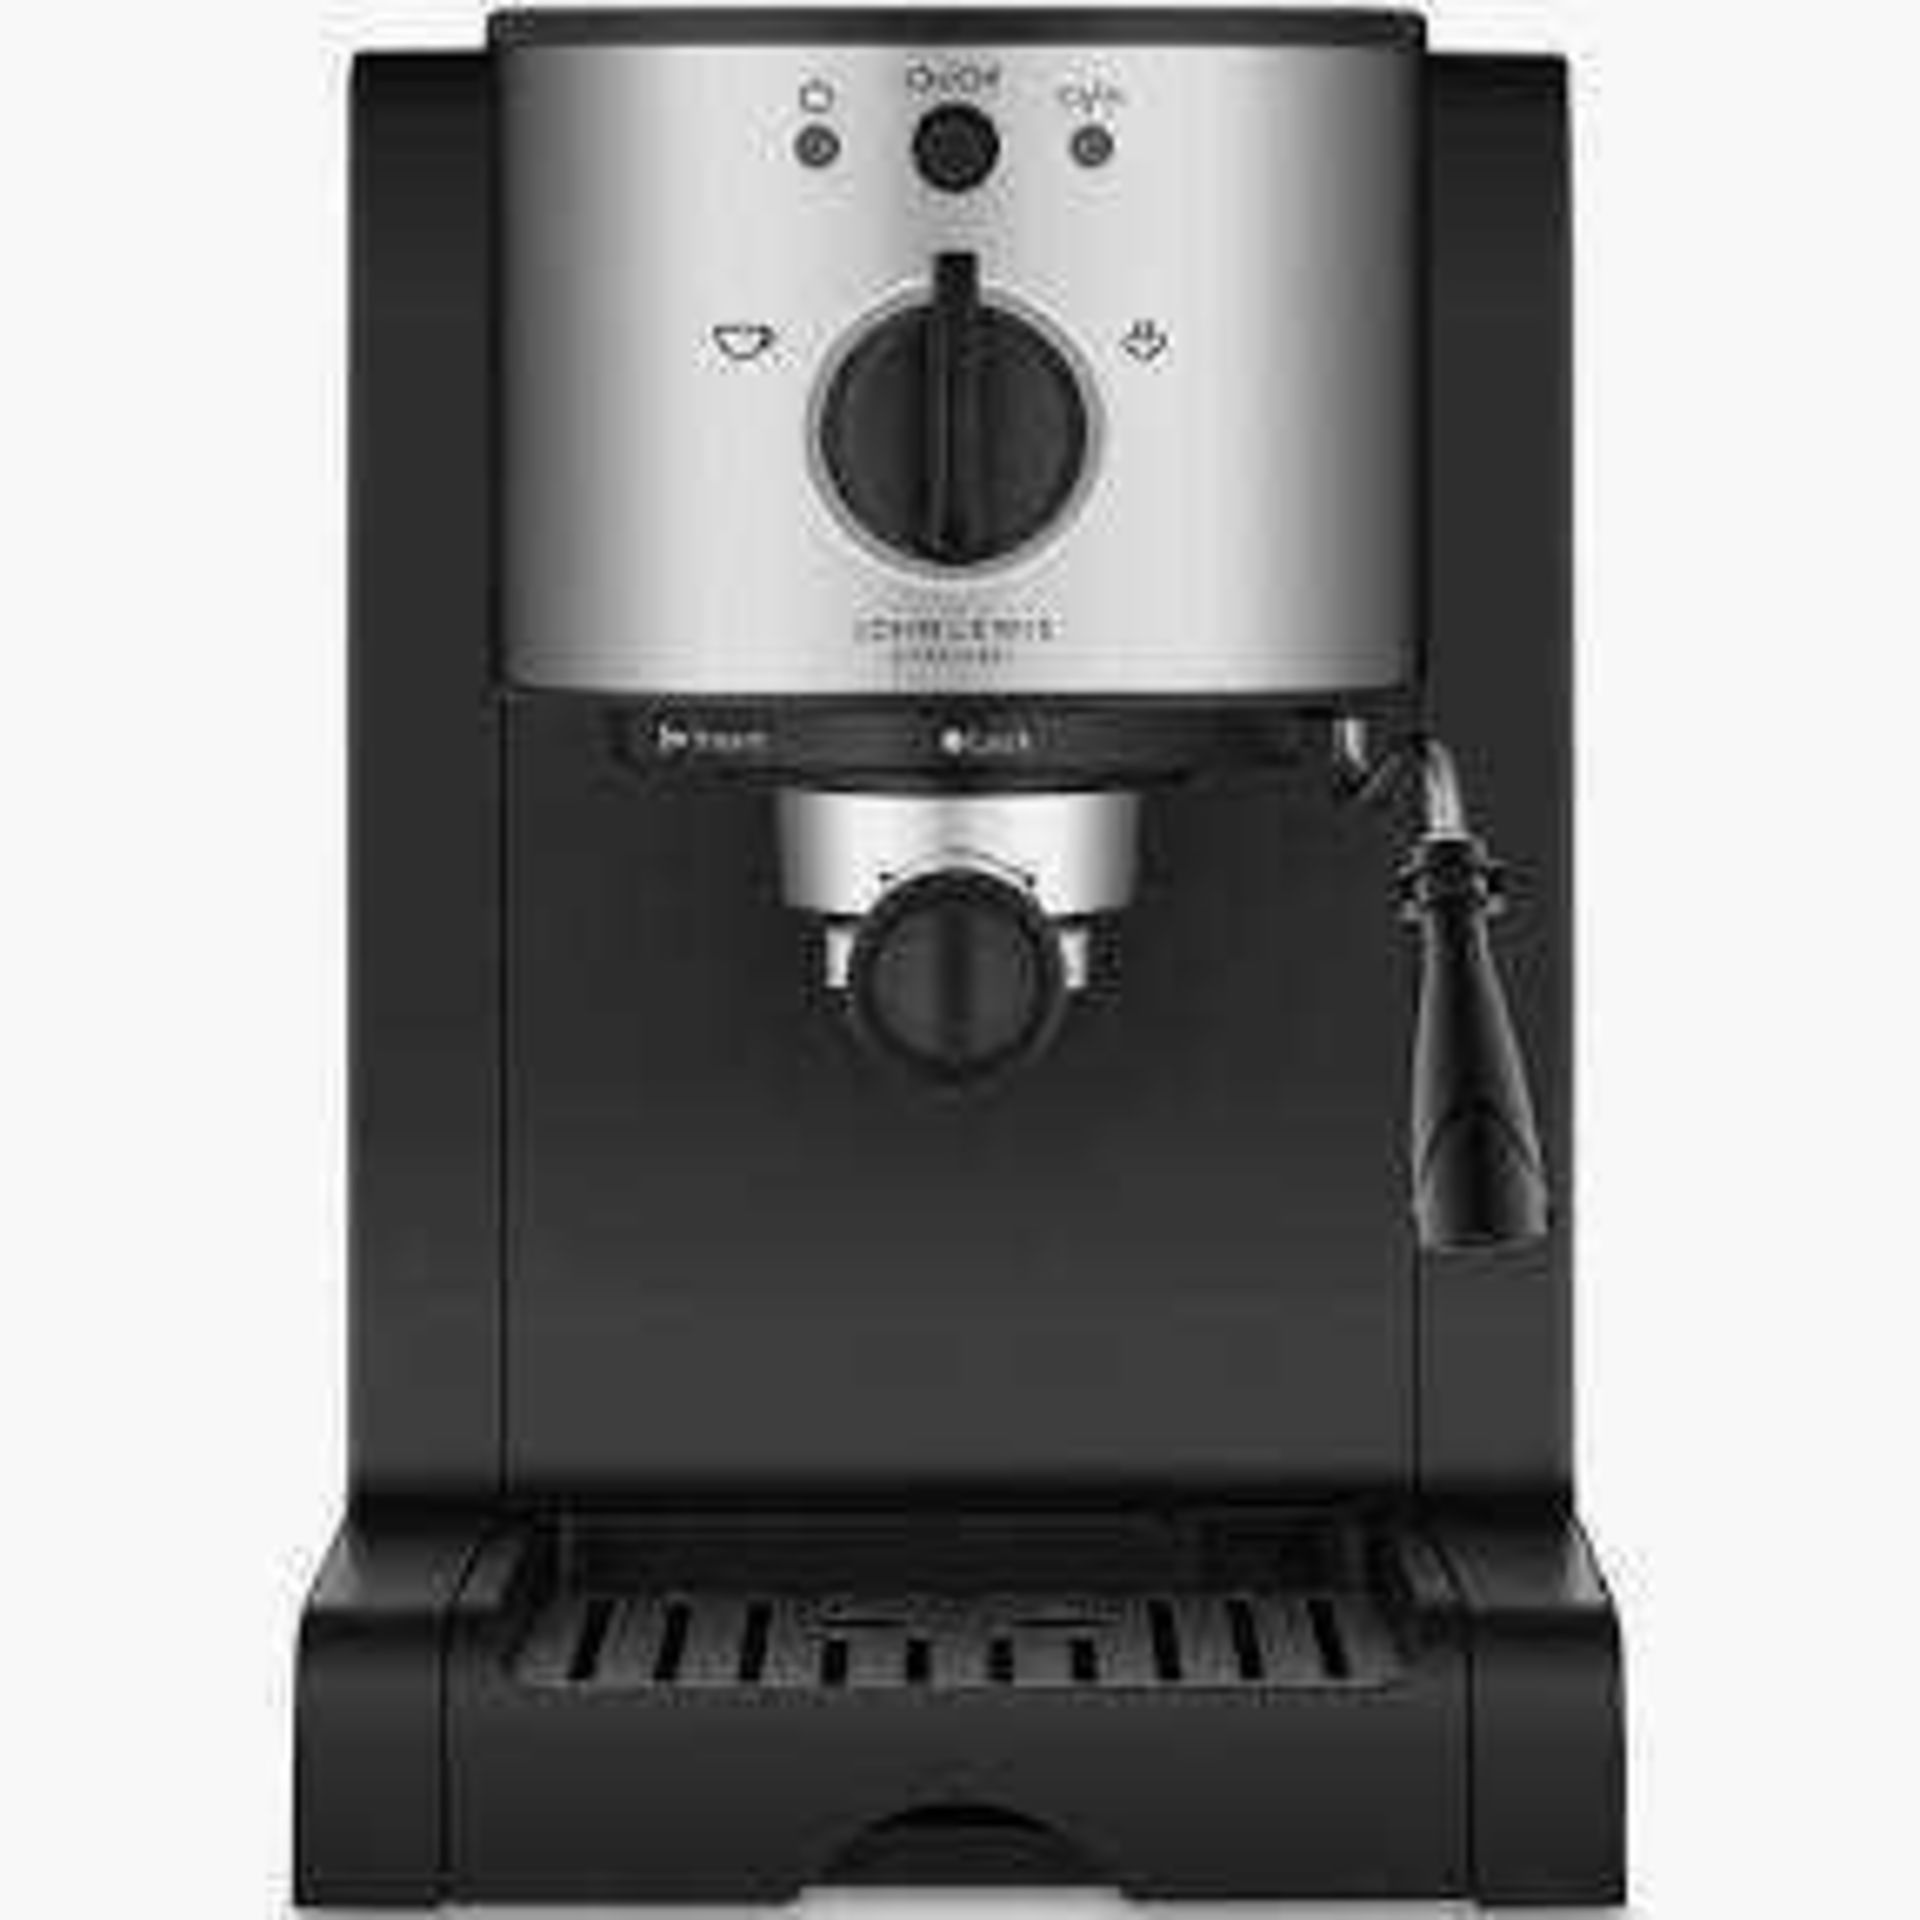 Combined RRP £170 Lot To Contain 2 John Lewis Assorted Coffee Machine To Include John Lewis Espress